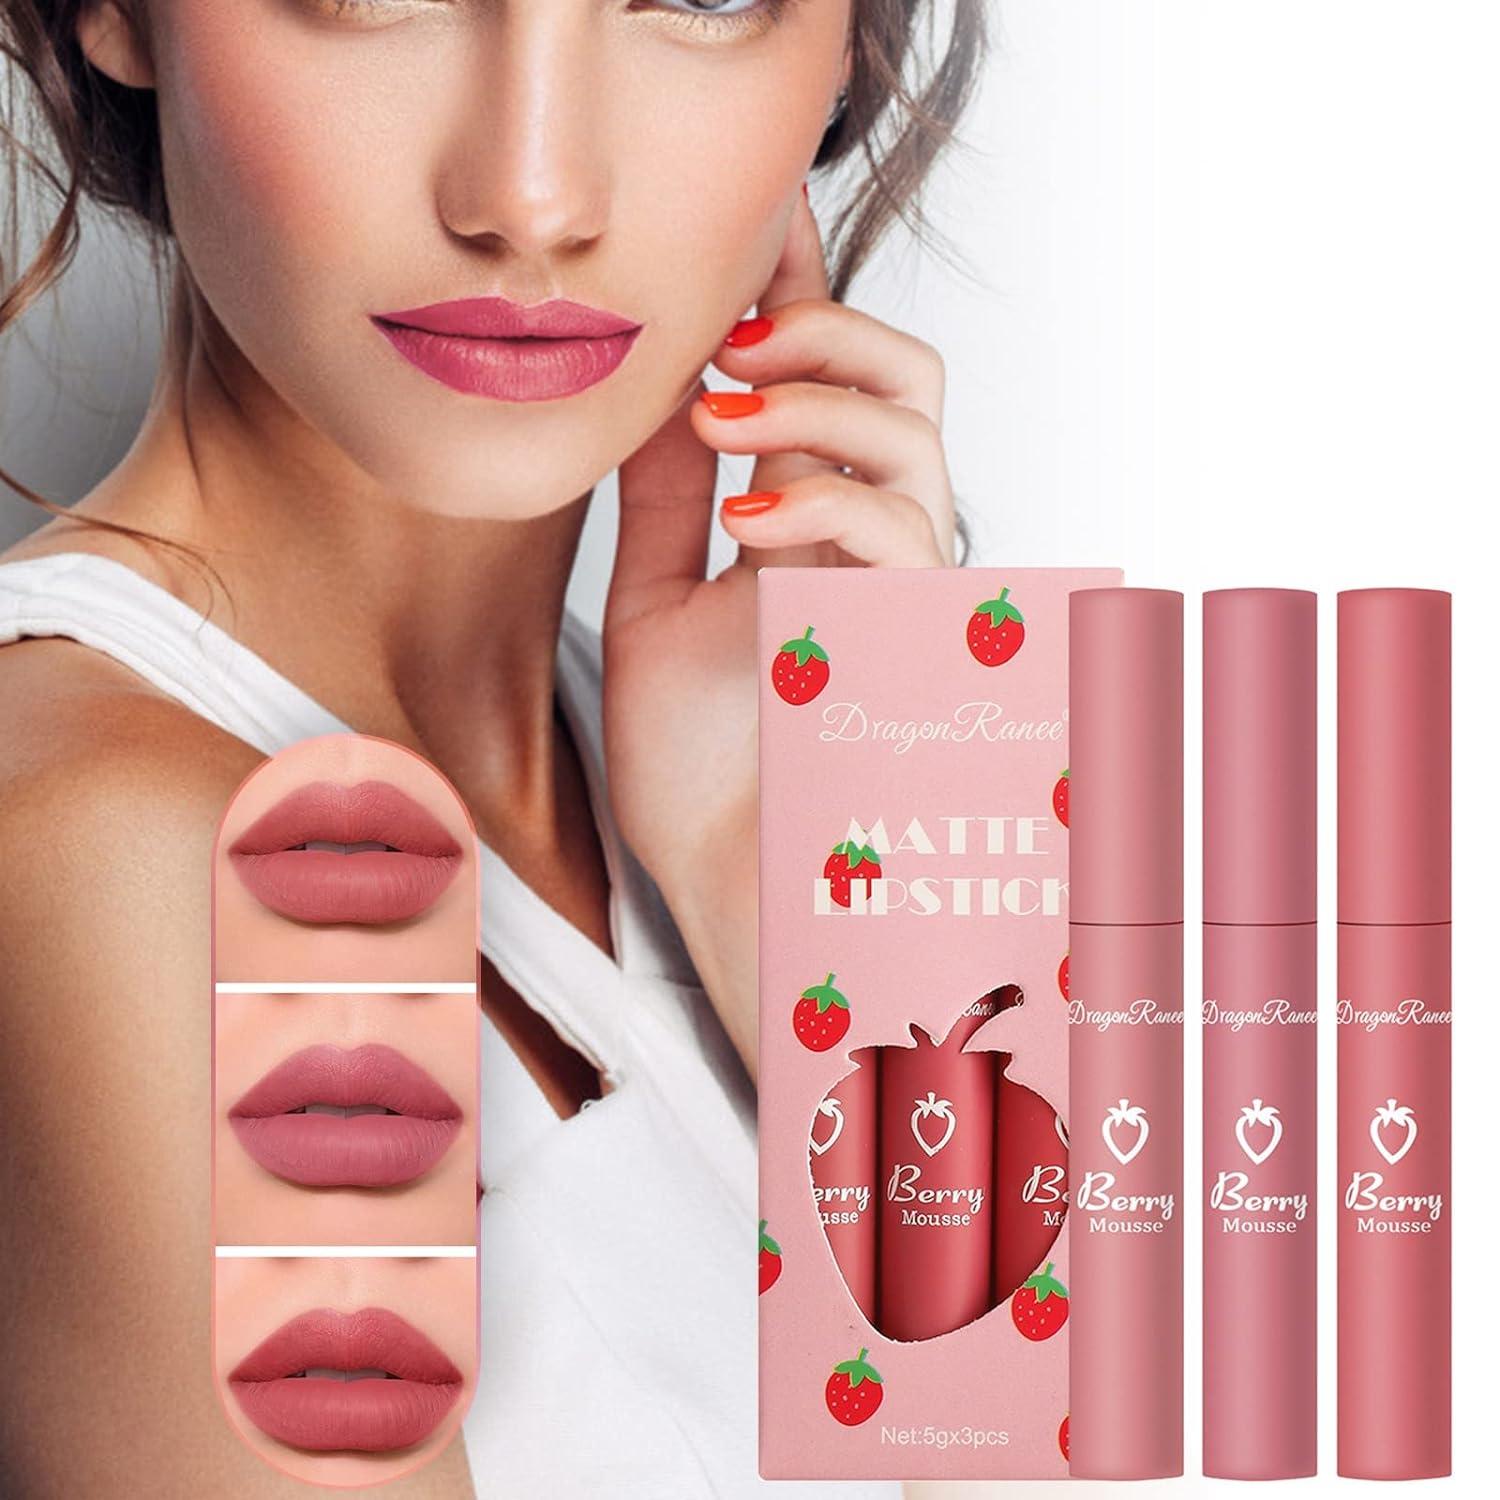 HMDABD Yak Butter Strawberry set lip gloss non-stick cup does not fade  easily, waterproof lip glaze lipstick set box Modifies skin tone, easy to  color